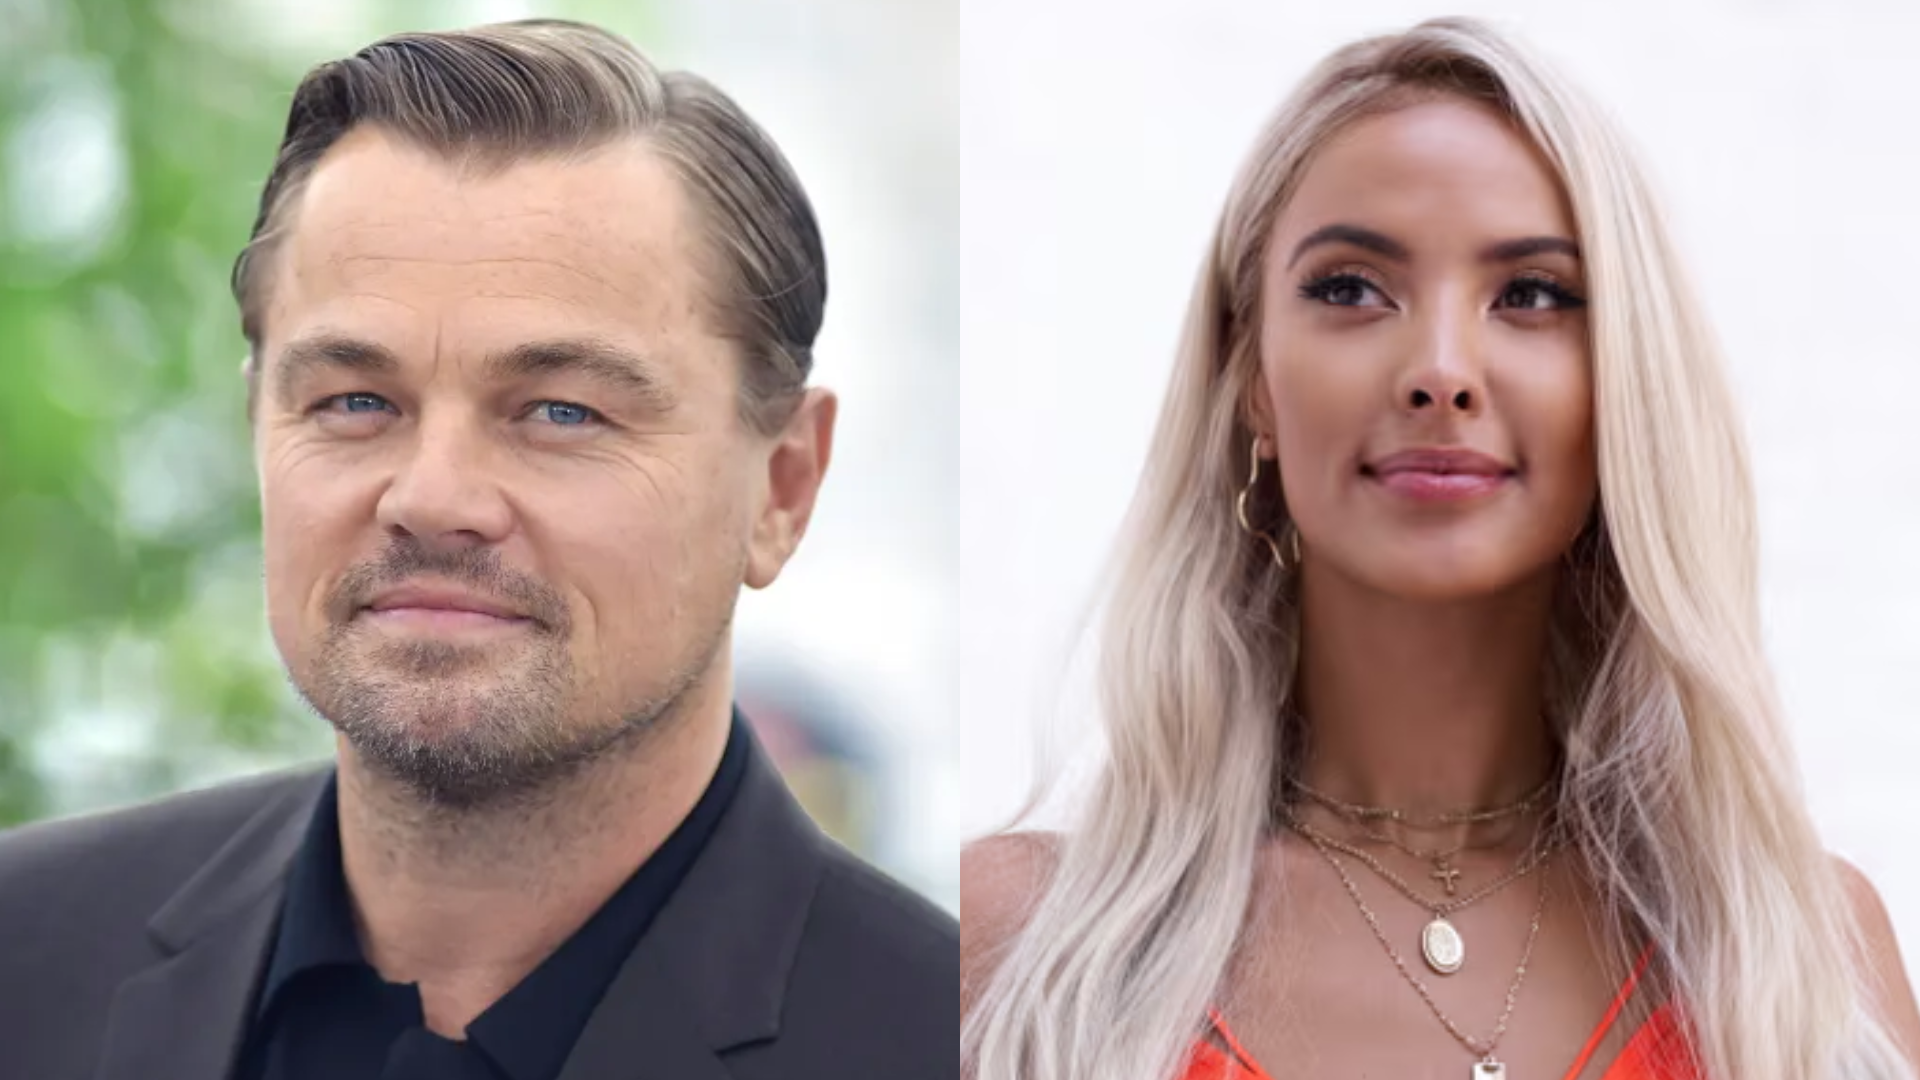 Leonardo DiCaprio’s Wild Party With Maya Jama In London Goes Out Of Hand As Actor Sparks Noise Complaint: Report